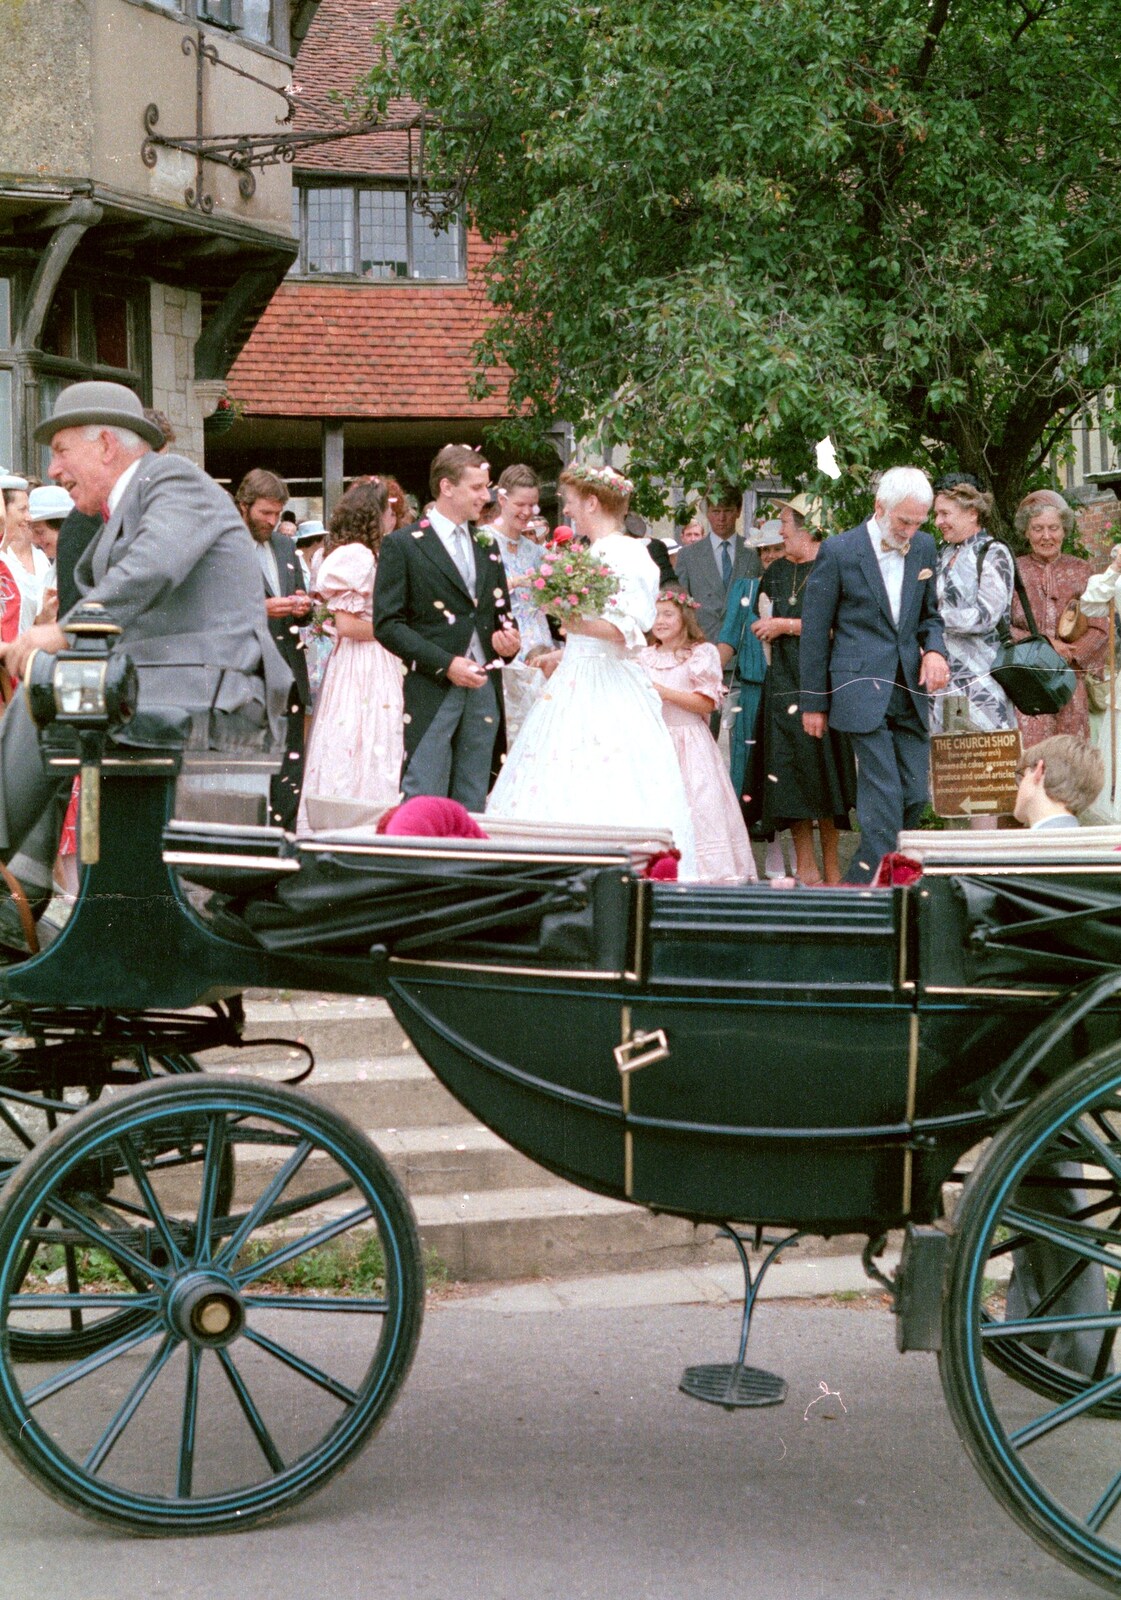 A random wedding takes place near Pevensey from A Trip to Groombridge, Kent - 10th July 1986